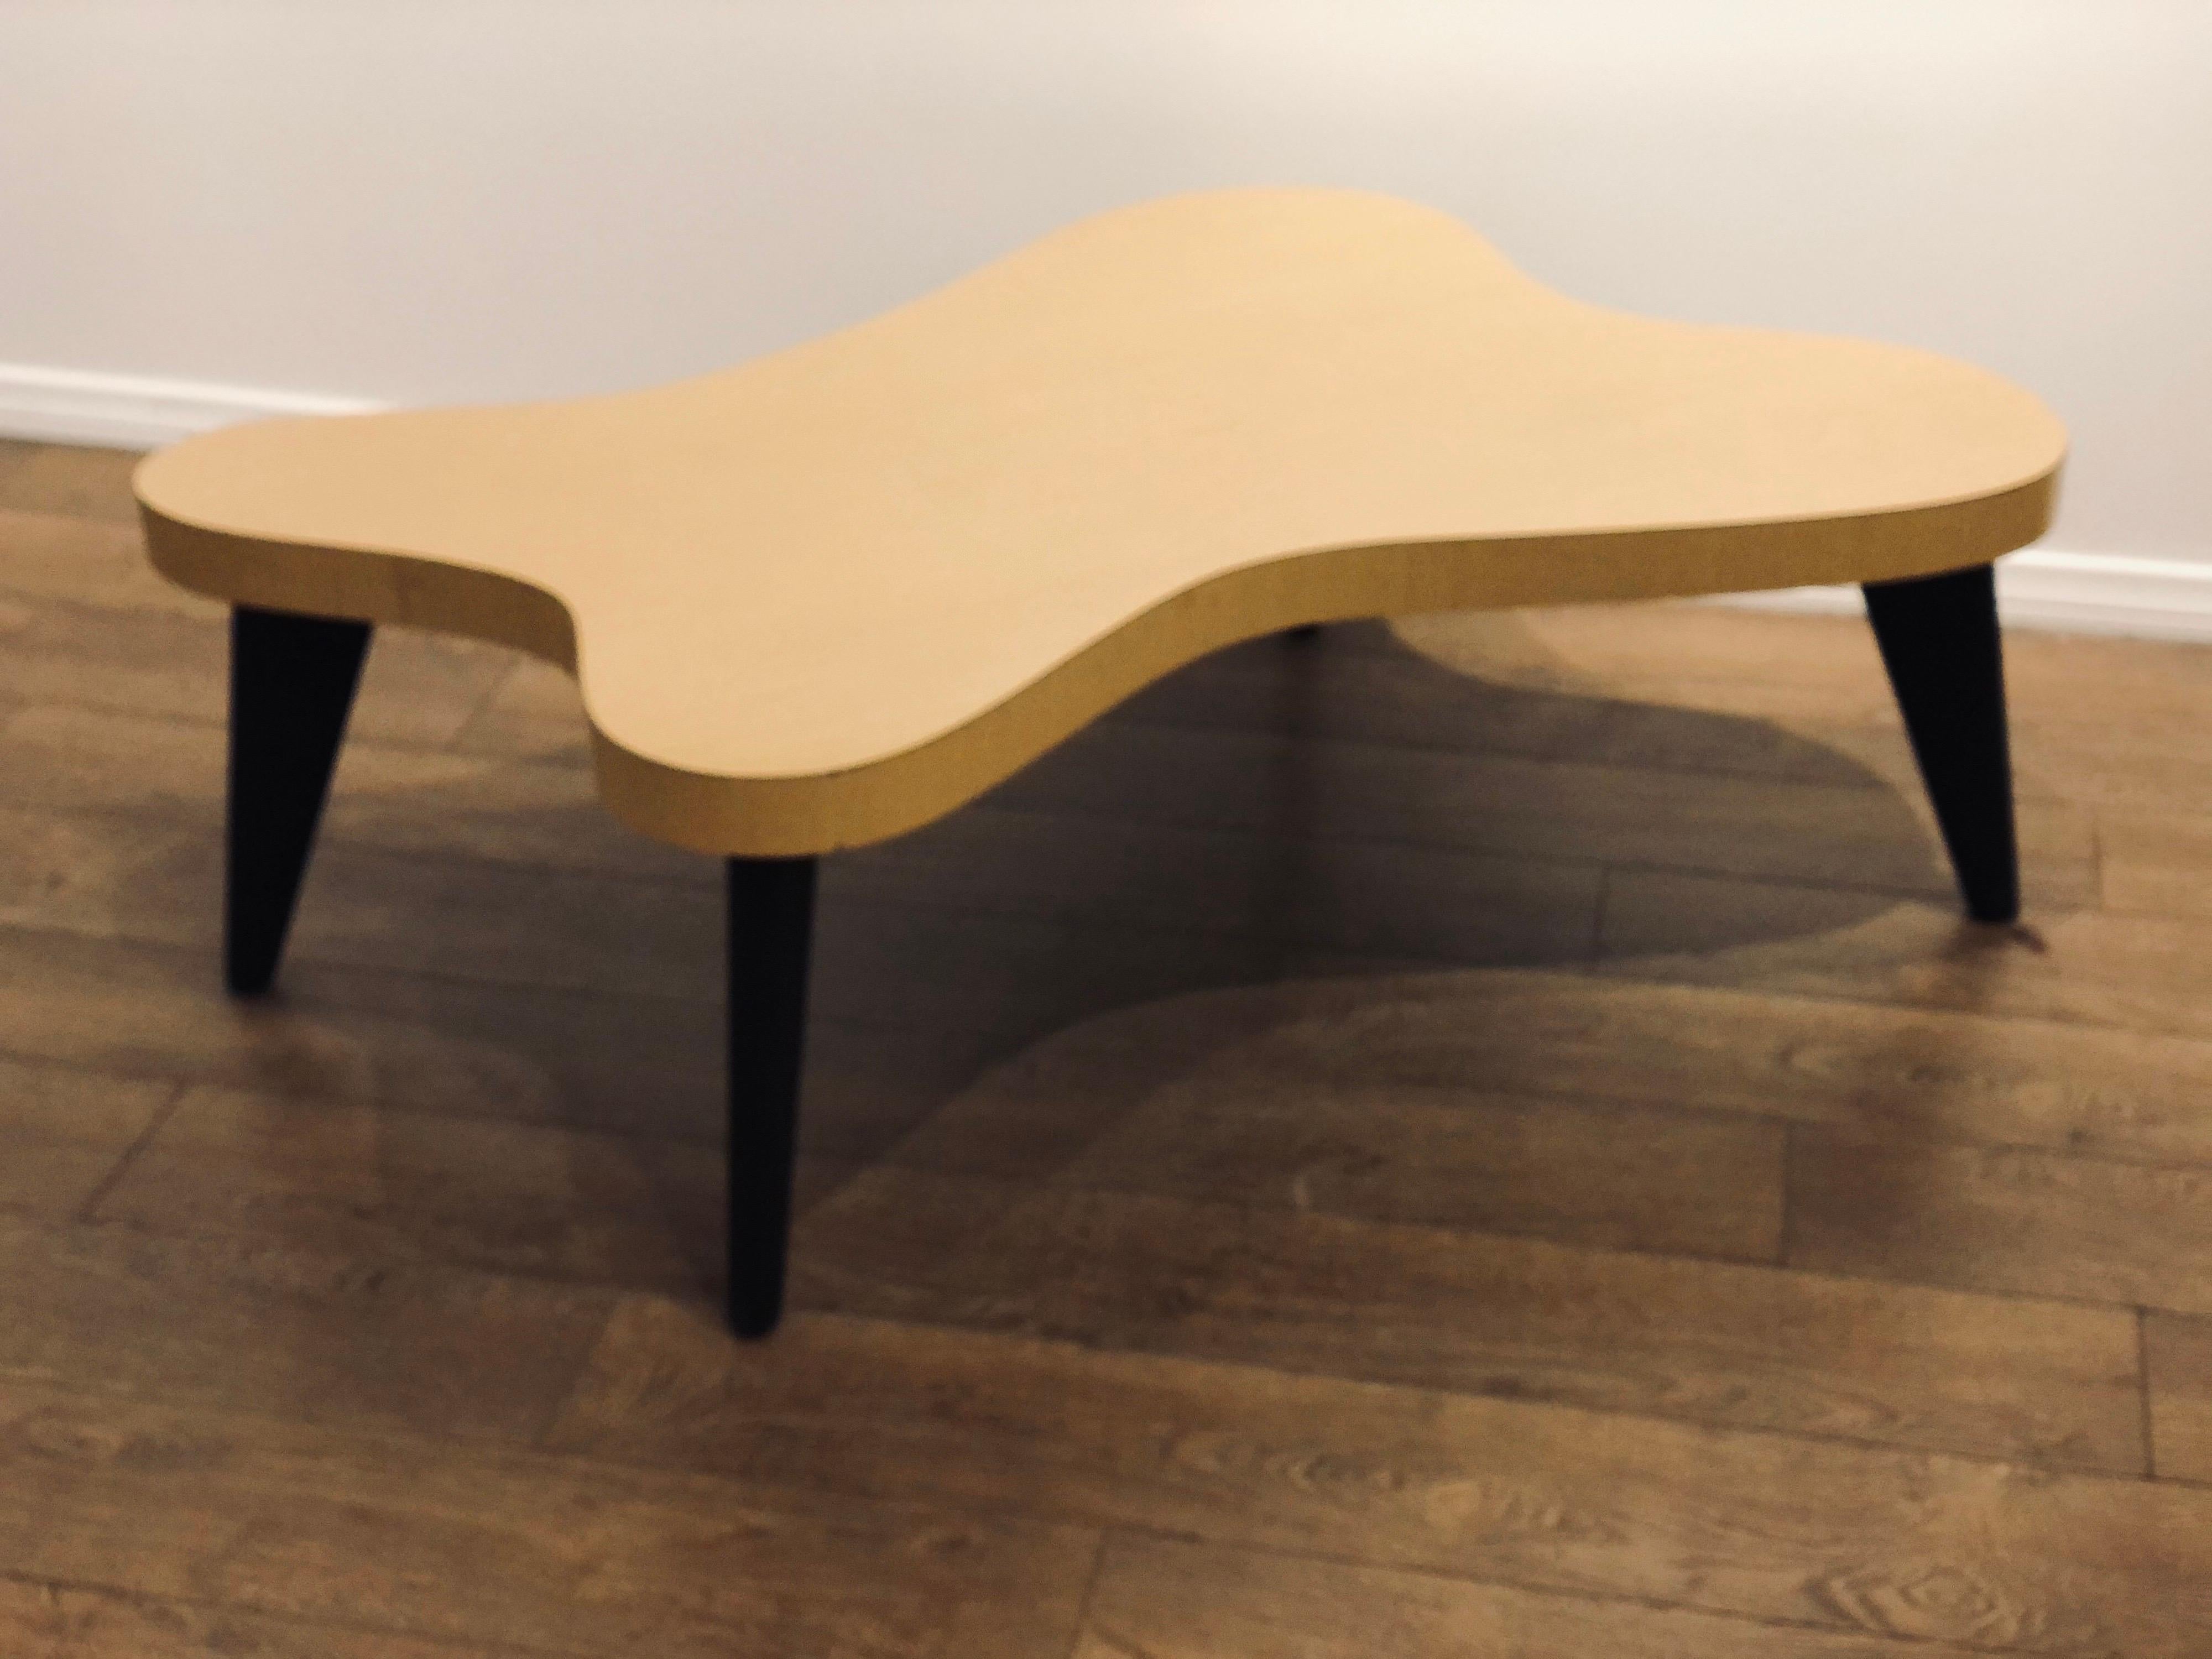 A Klassik midcentury freeform coffee table, in a cream laminate top with black lacquer legs, circa 1950s very nice condition a couple of fleabites around the edge. This table its perfect great size goes great with any type of decor, from art deco to